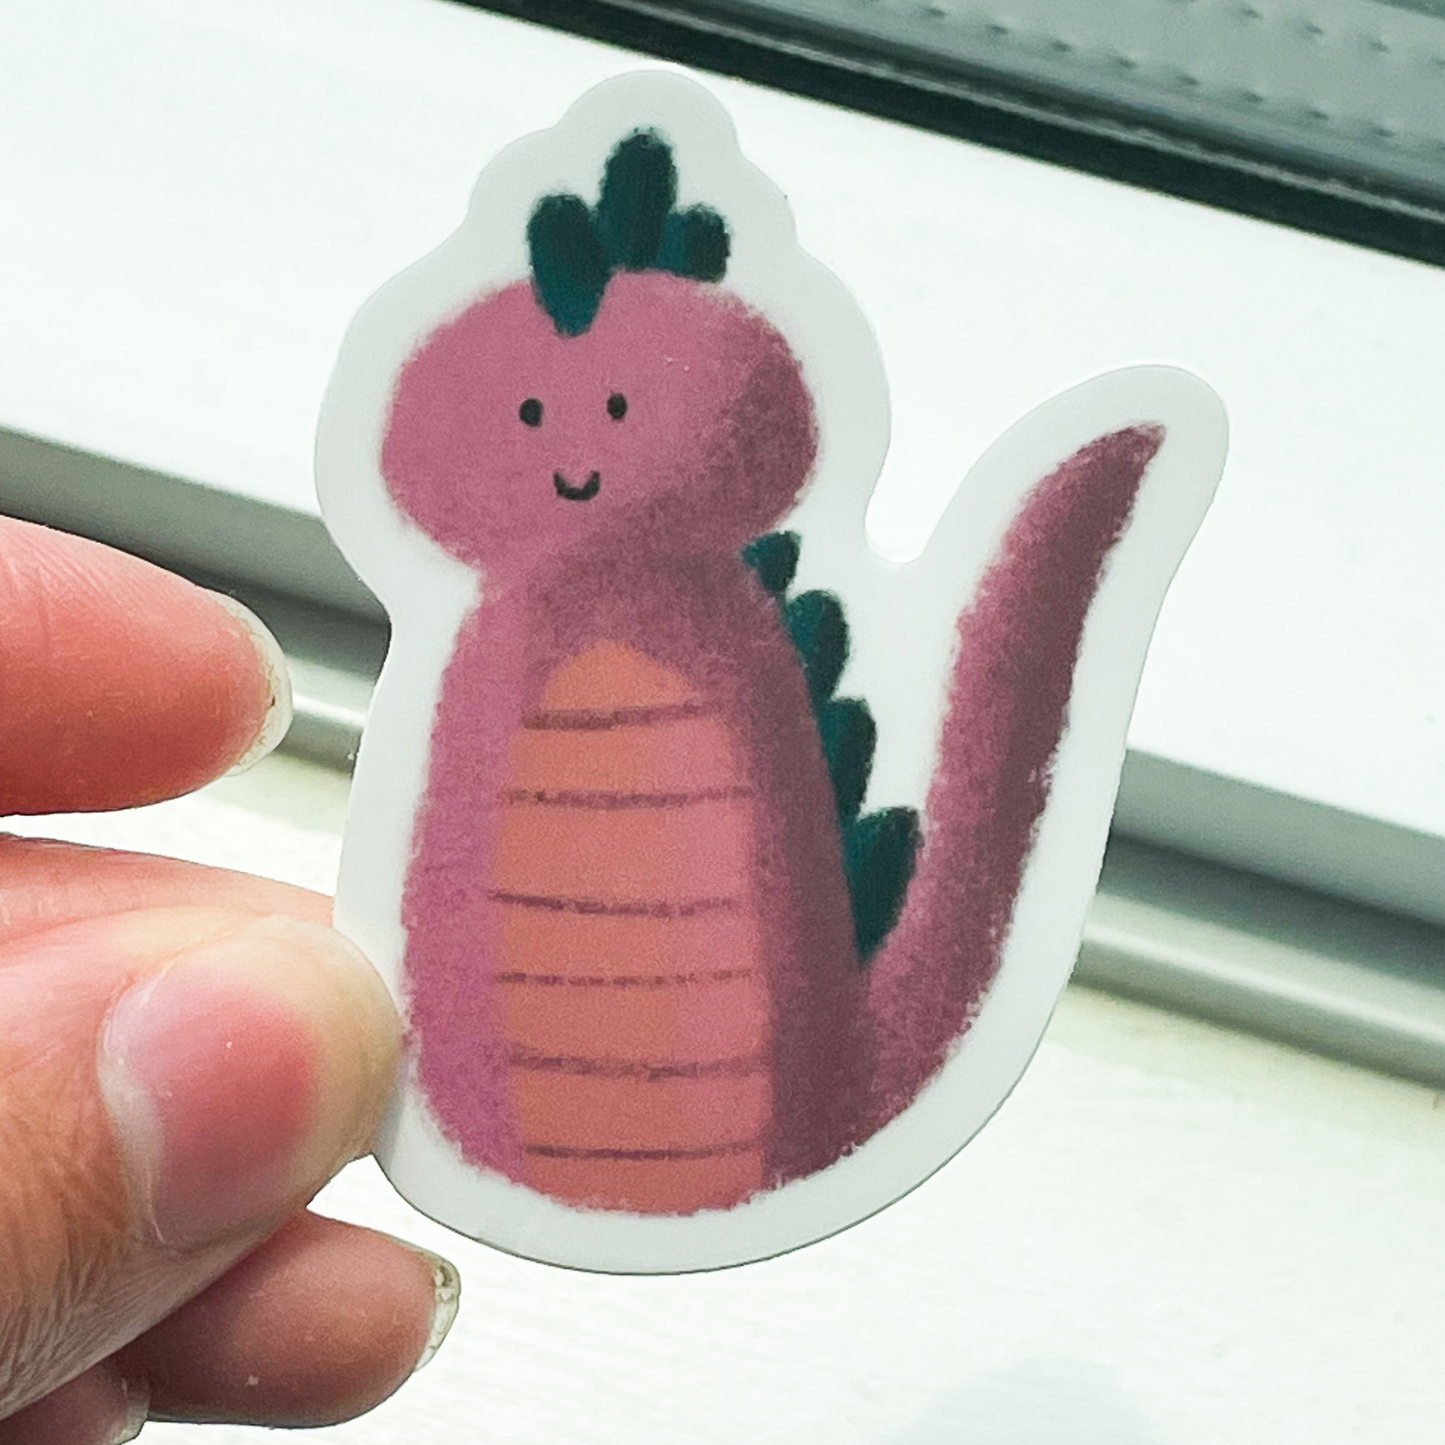 A hand holding a sticker that has a smiling pink monster on it with dark green spikes and a long pink tail. The background is the bottom of a white window sill.